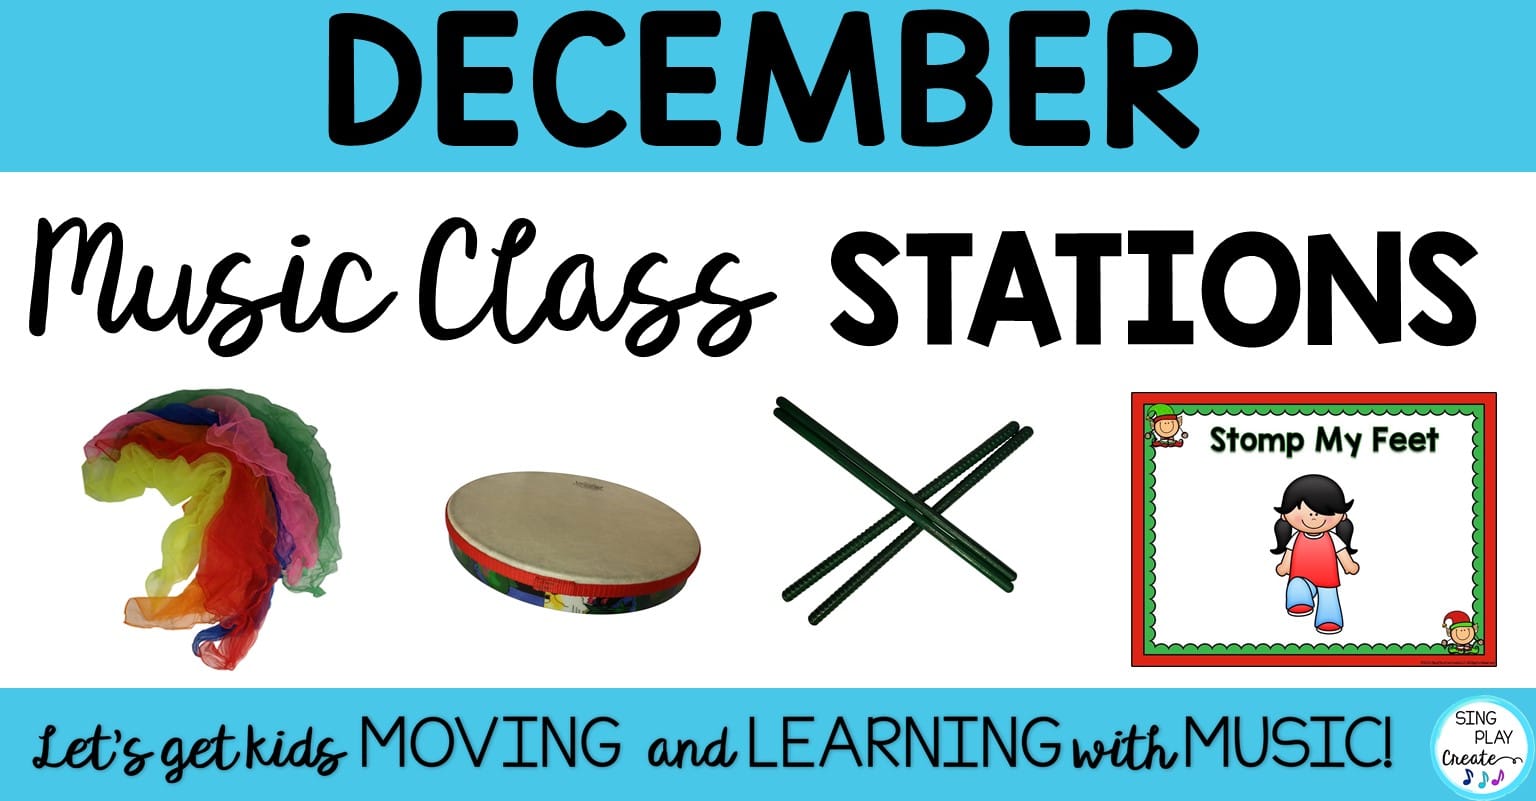 You are currently viewing December Music Class Stations